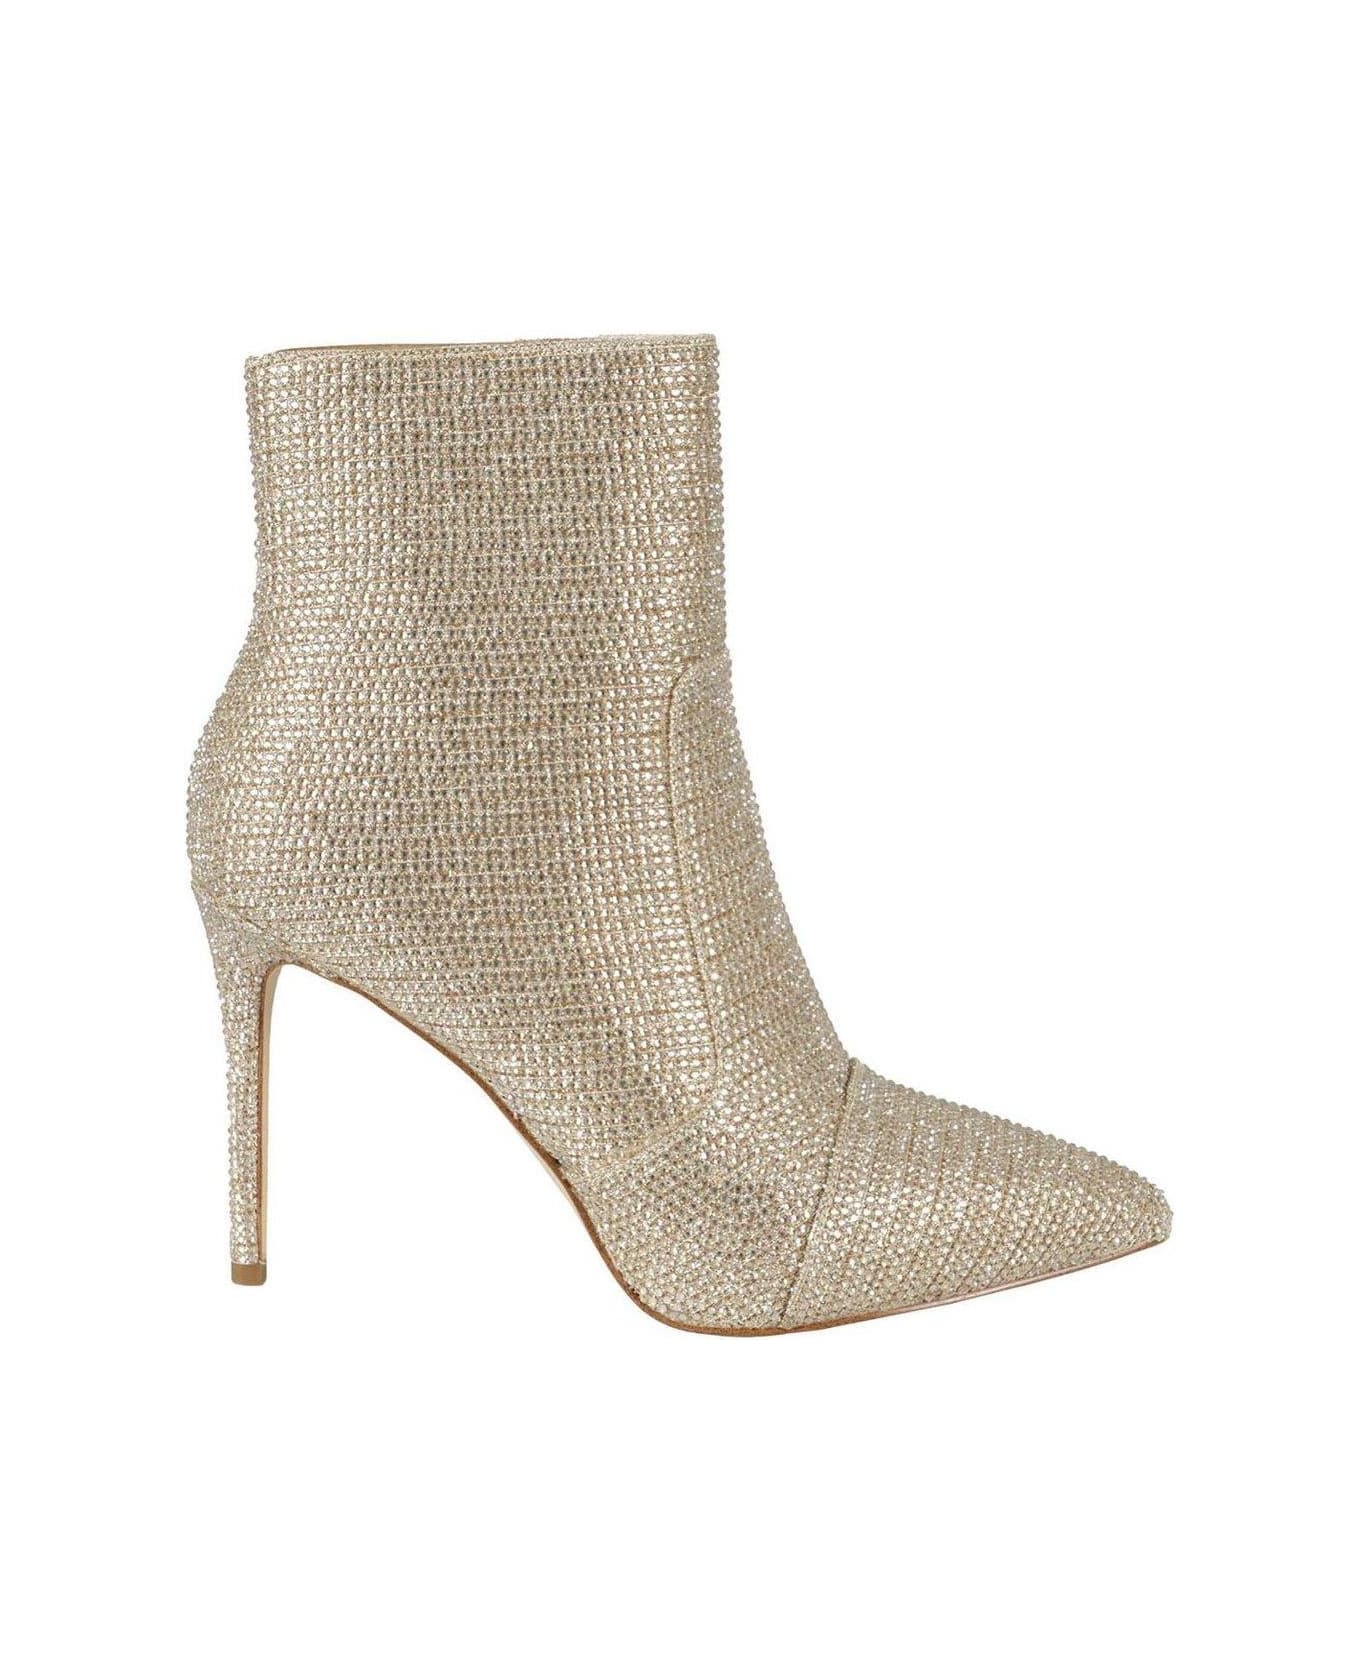 Michael Kors Rue Glitter Embellished Heeled Ankle Boots - Pale Gold ブーツ